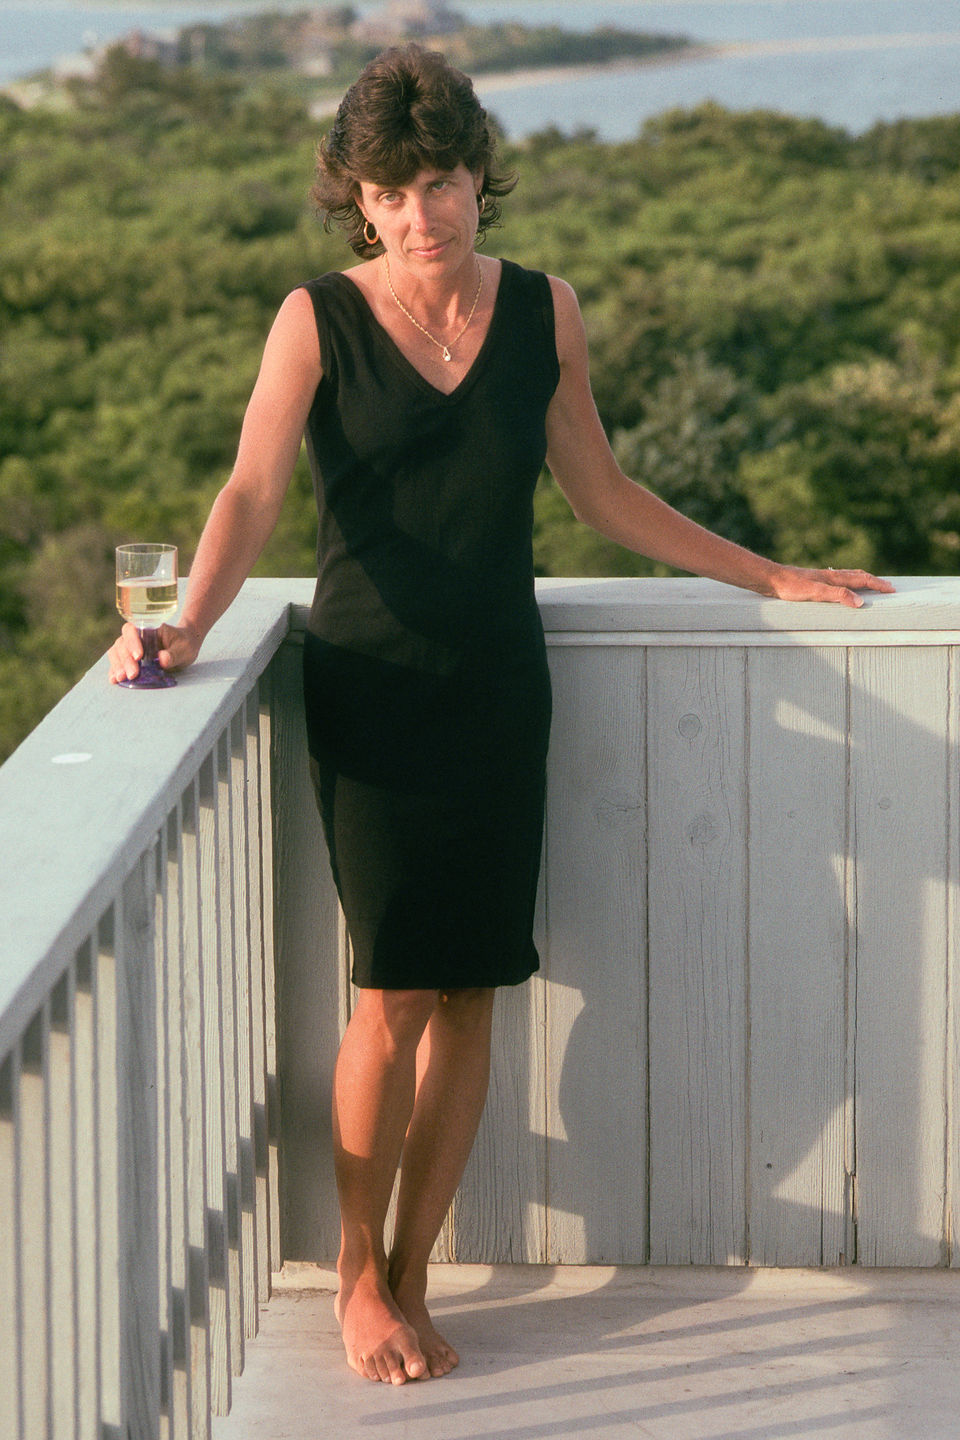 Lolo in Black Dress on Deck of "Gut House"